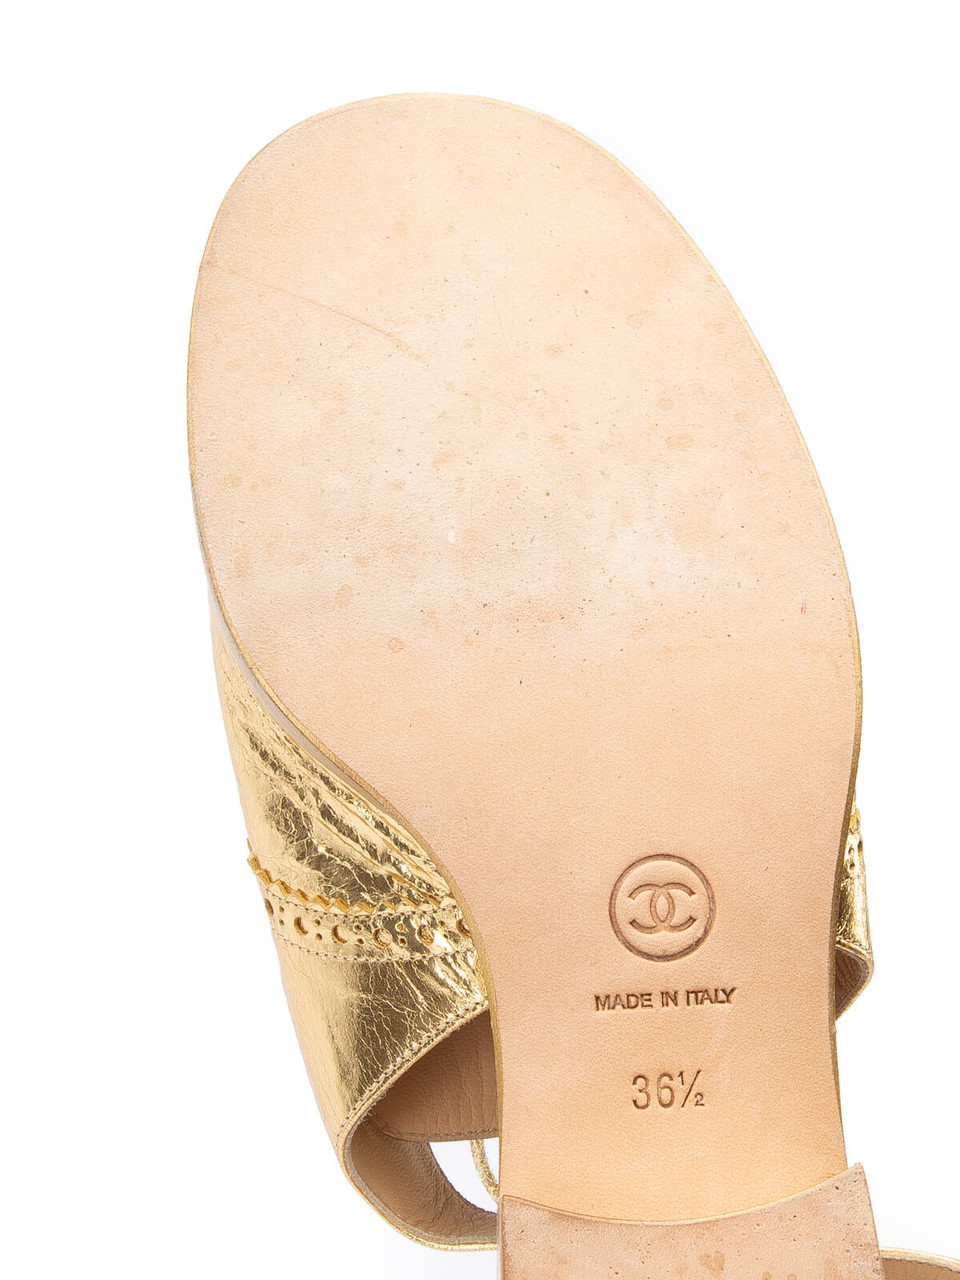 Chanel Women's Peep Toe Ankle Strap Oxford Sandals, Size 3.5 UK, Gold Metallic Leather